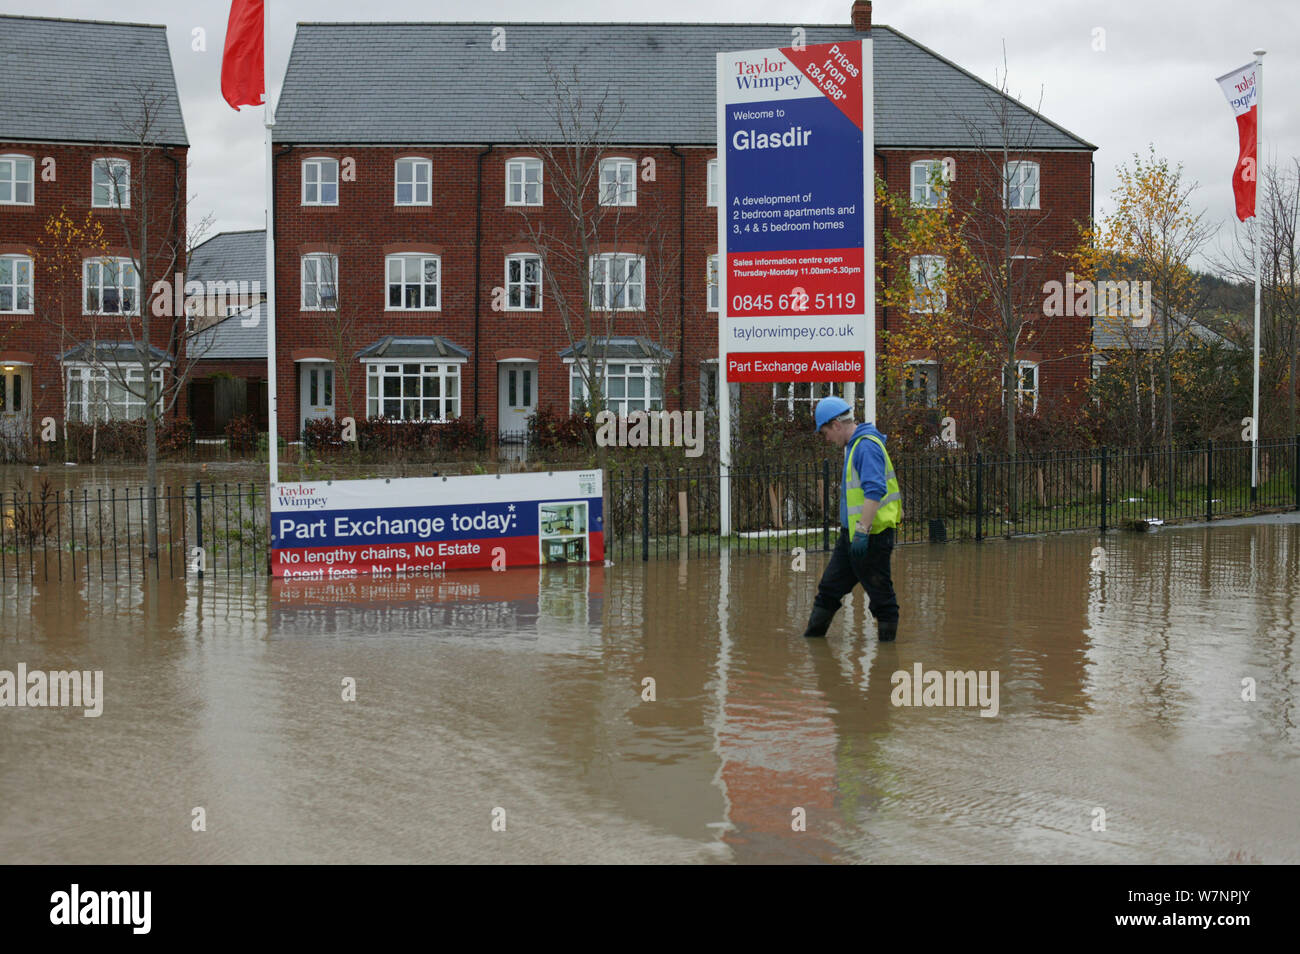 Flooding of newly built housing in the Glasdir estate with houses for sale, Ruthin, the Vale of Clwyd, Denbighshire, Wales, UK.  This is an area at risk of flooding and therefore difficult to obtain House insurance. 27/11/ 2012 Stock Photo